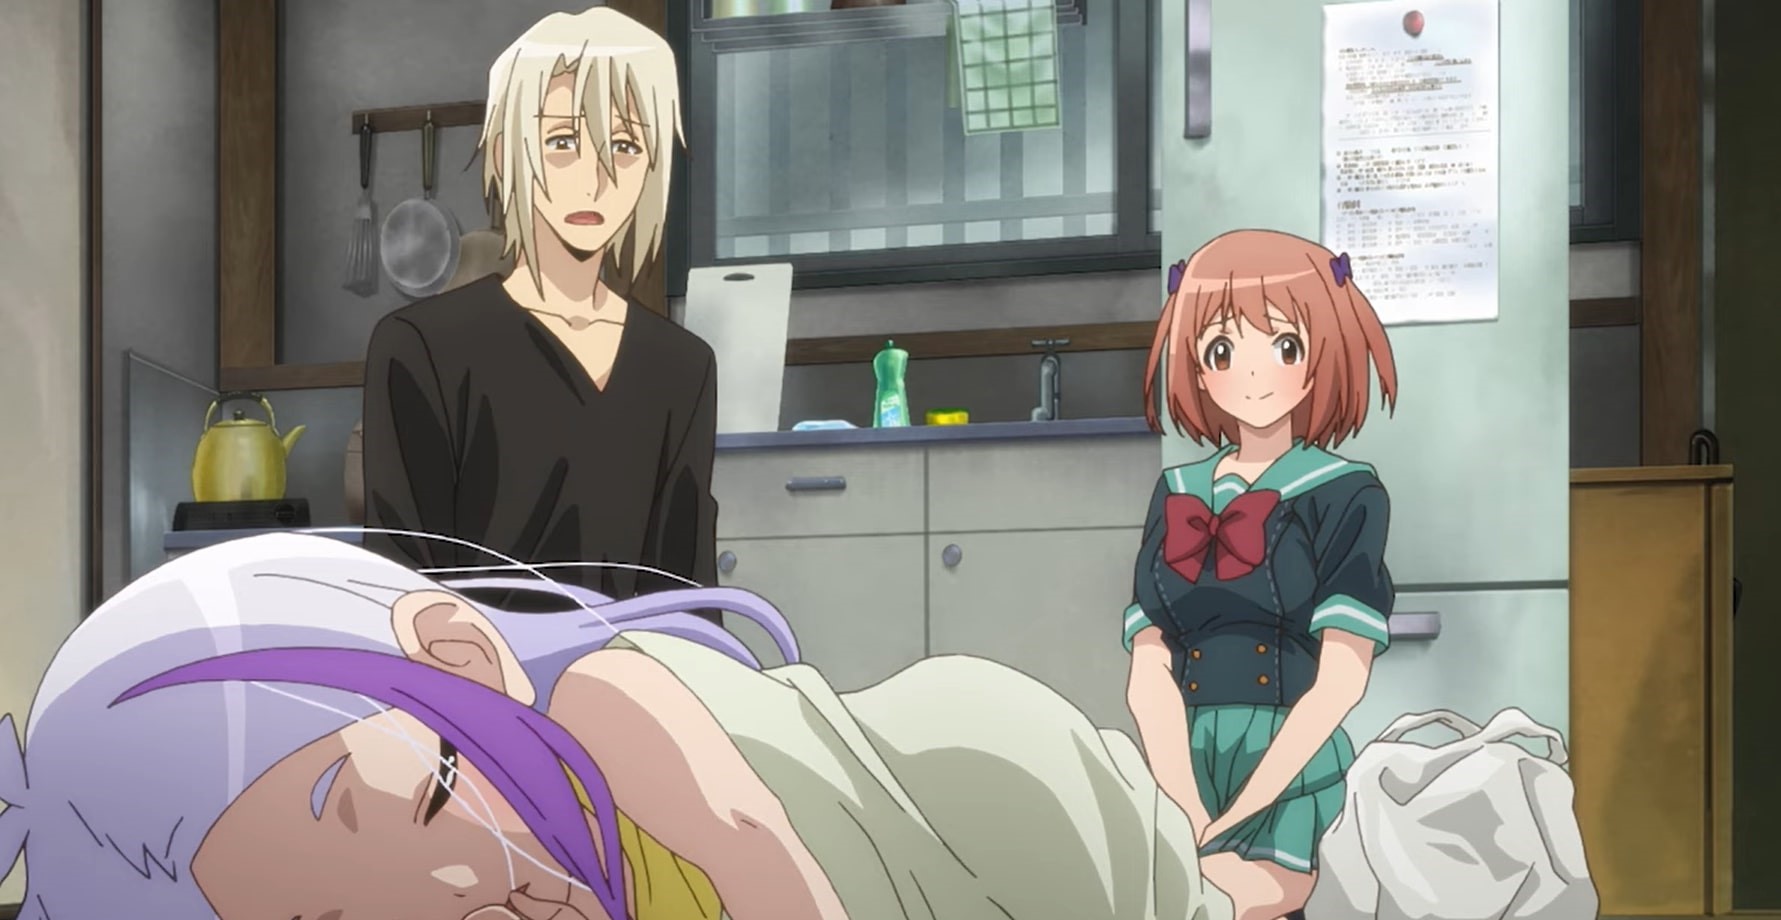 The Devil Is A Part-Timer Season 2 Episode 2 Review: Unexpected Fatherhood